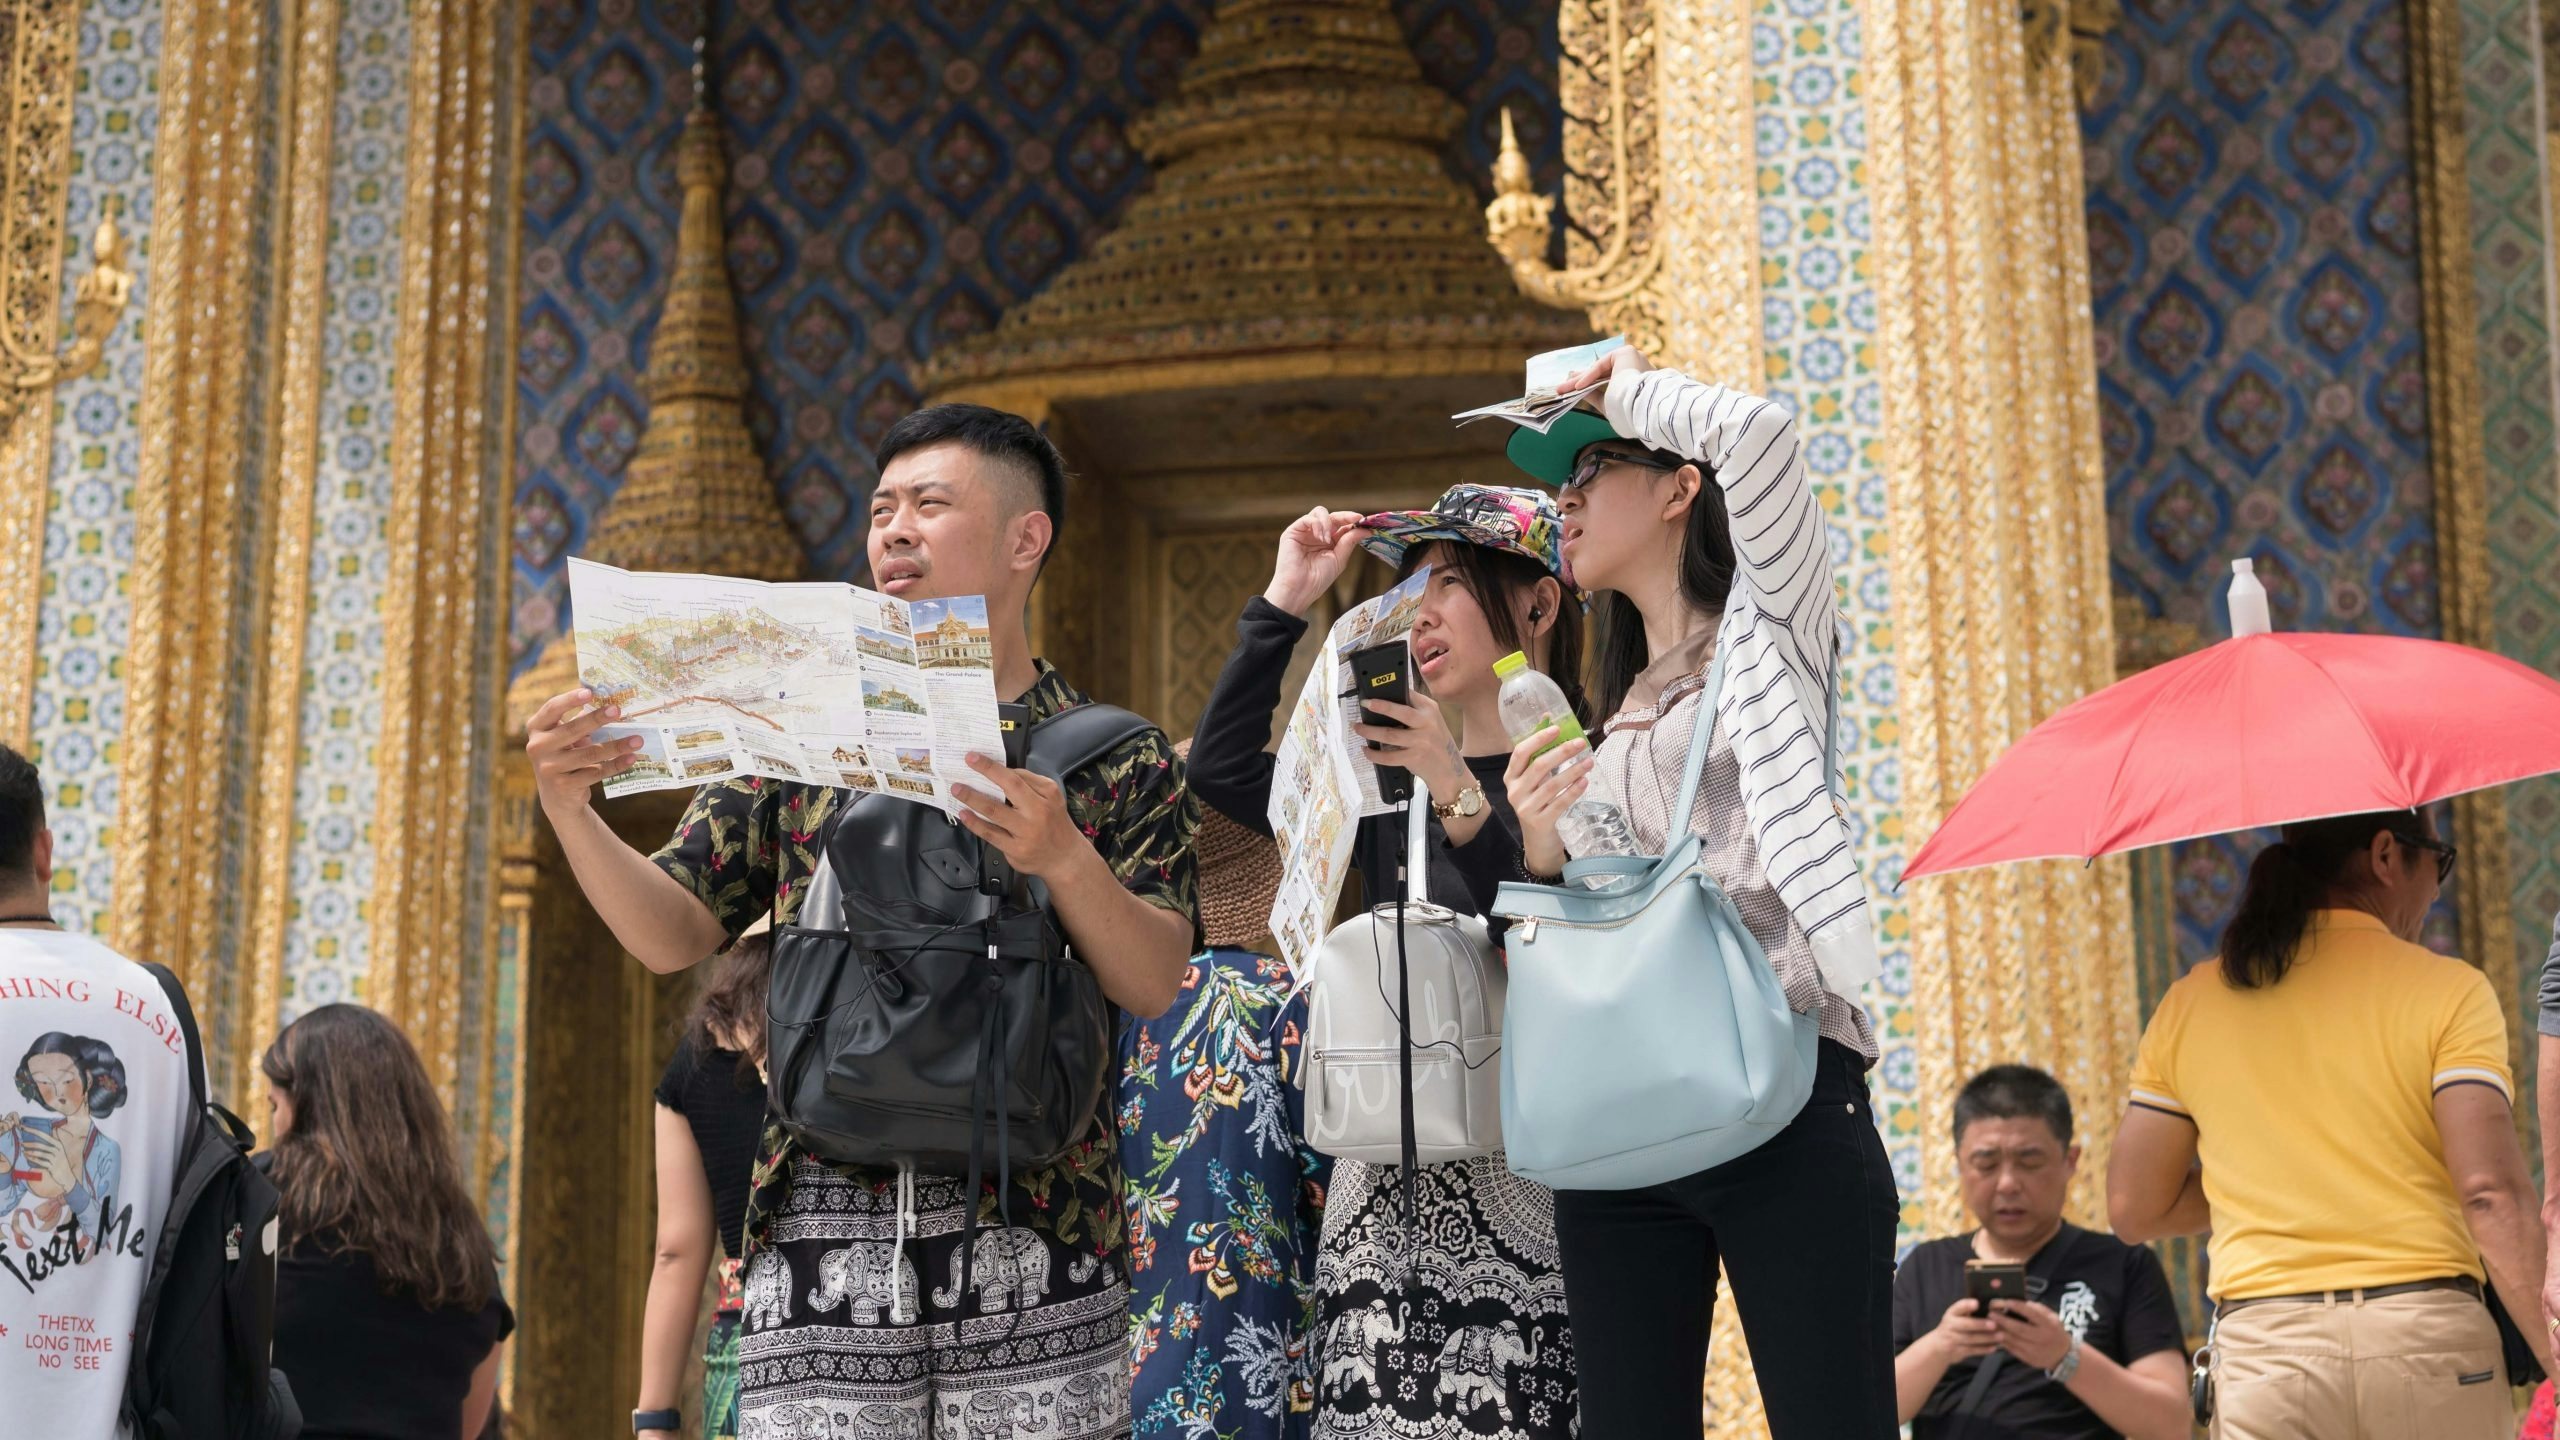 Thailand is pinning its hopes of recovery on Chinese tourists. However, new entry fees and mixed travel experiences have tempered their excitement. Photo: Shutterstock